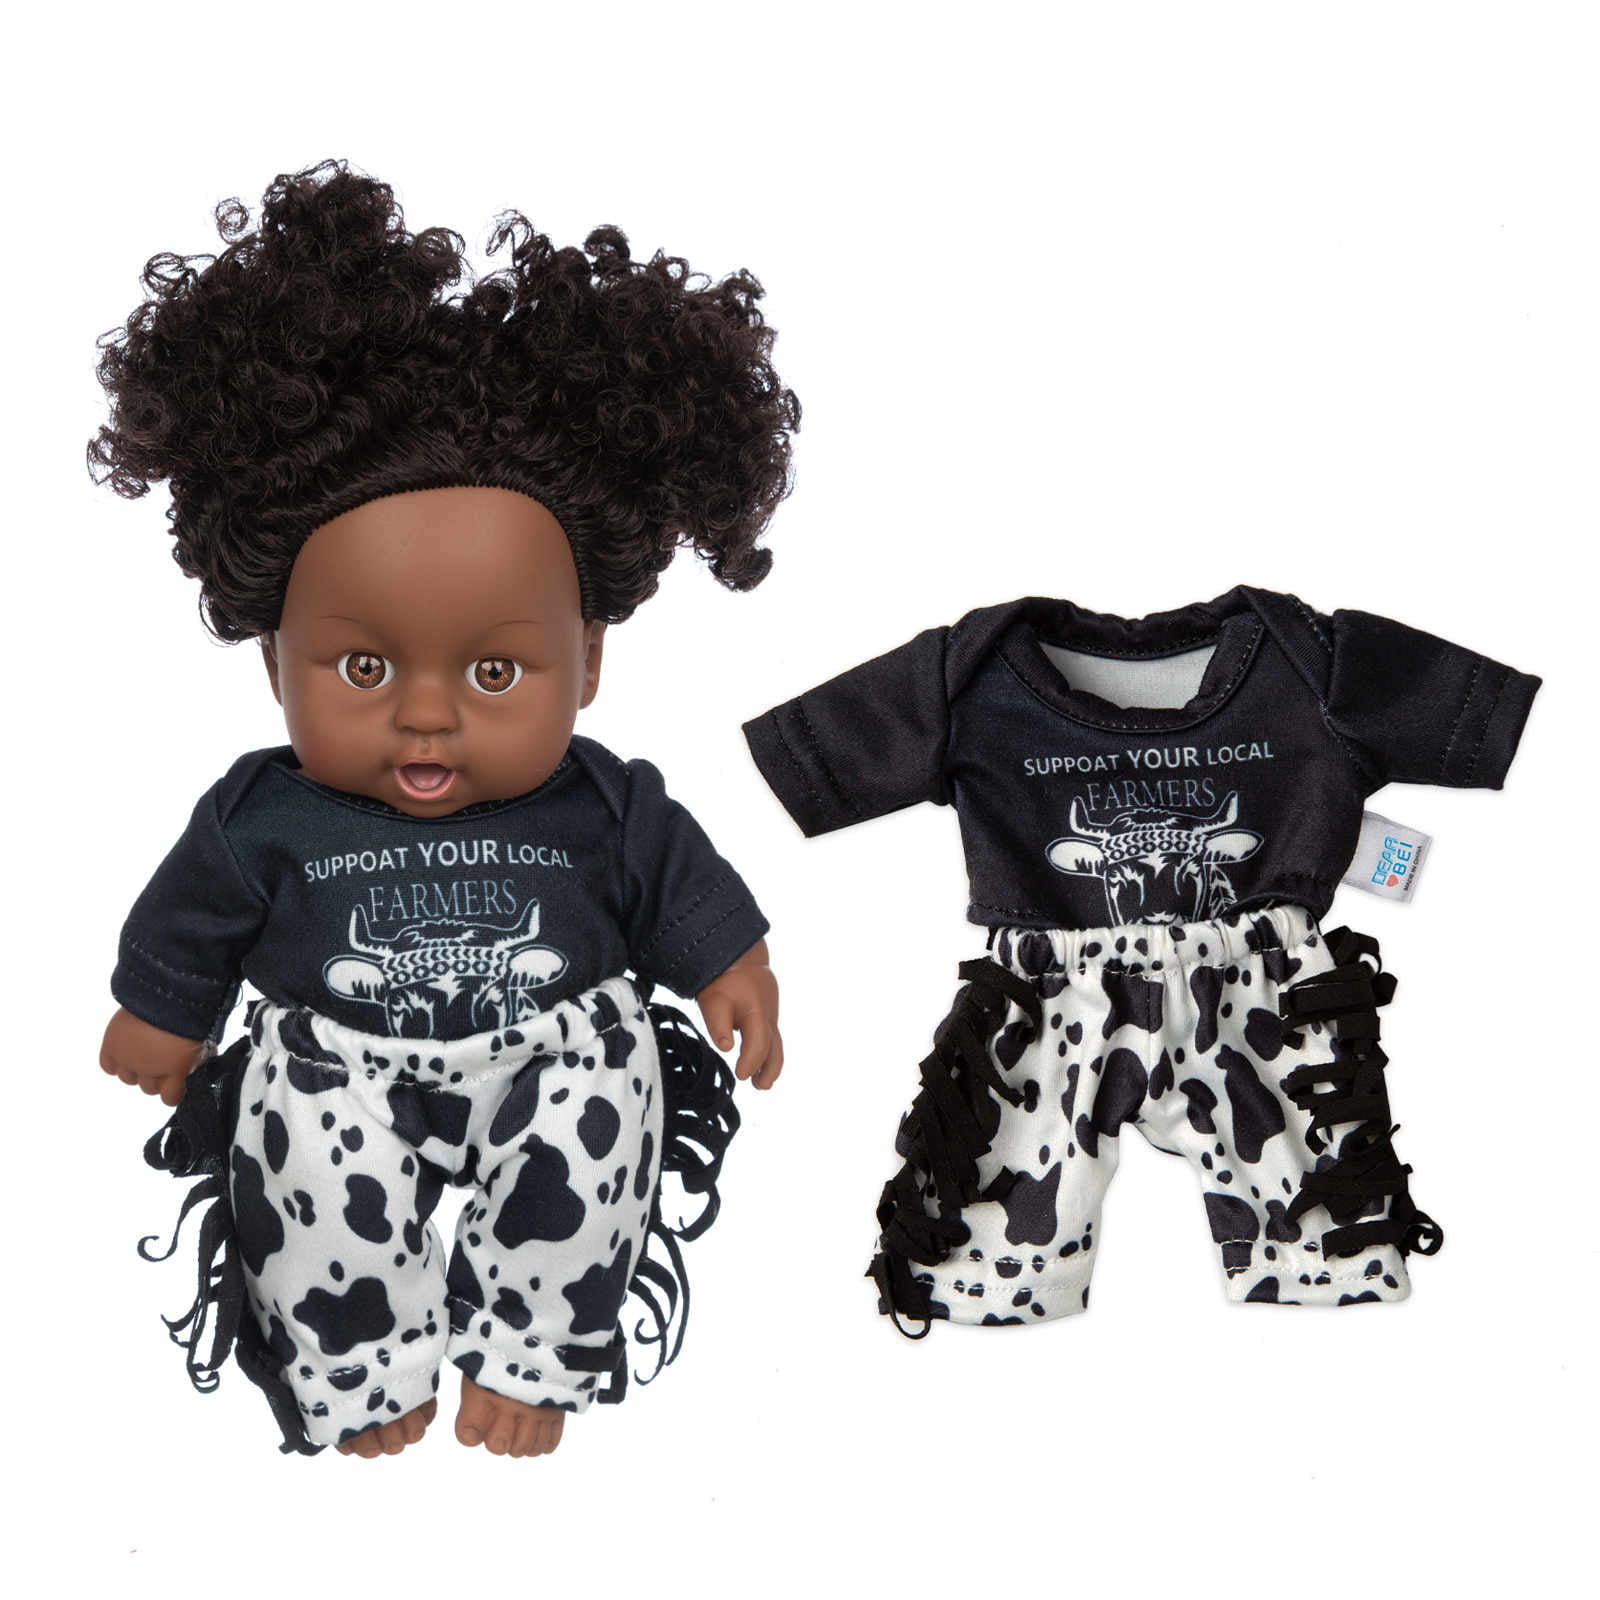 VIVBOO Black Dolls 12in African American Baby Doll for Kids Aged 2